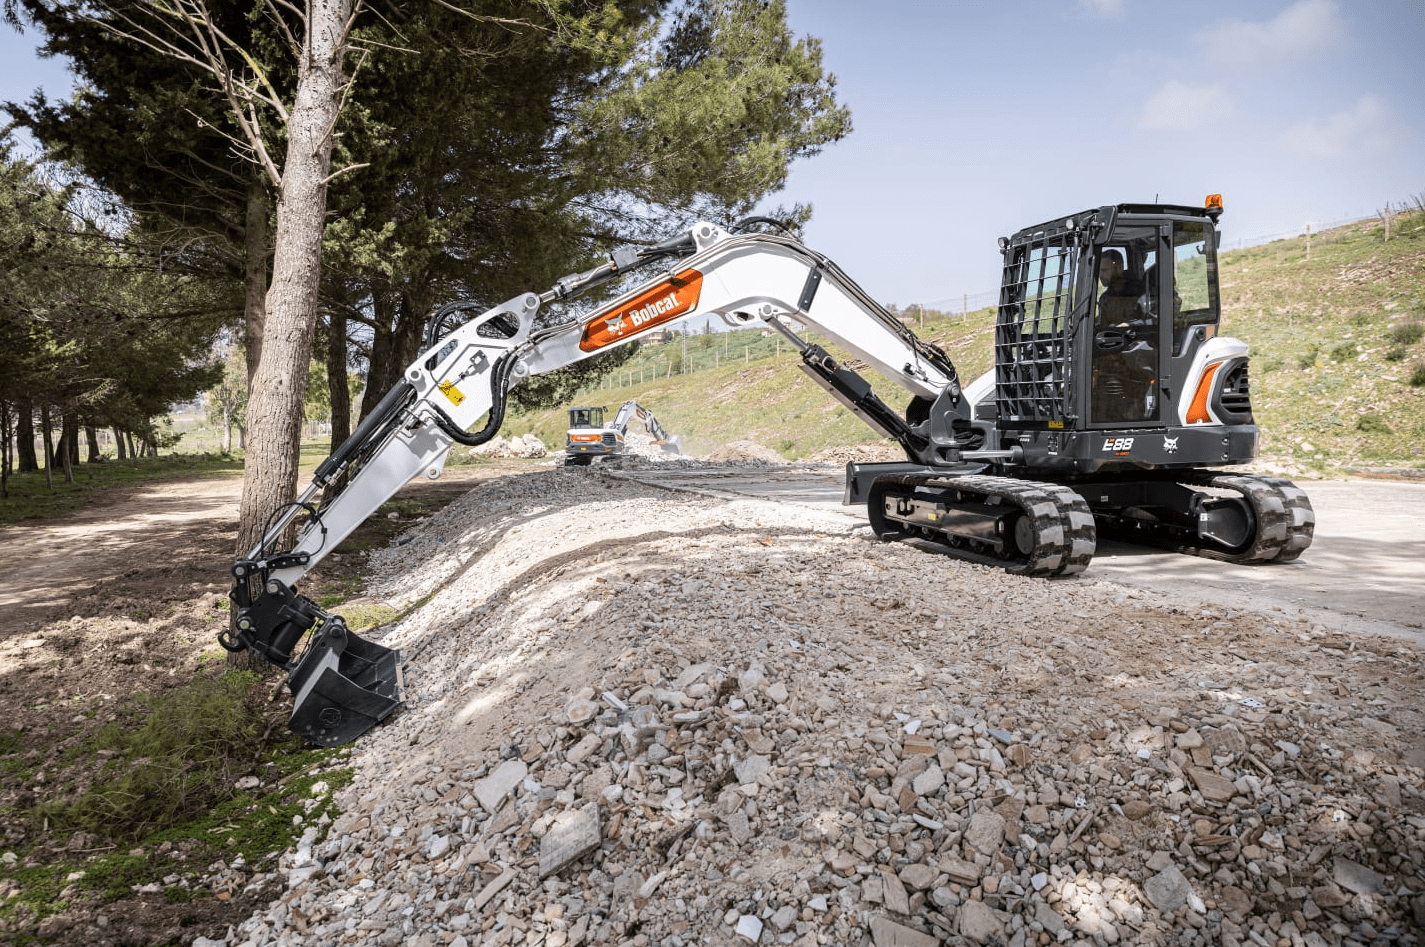 Browse Specs and more for the Bobcat E88 Compact Excavator - Bobcat of the Rockies